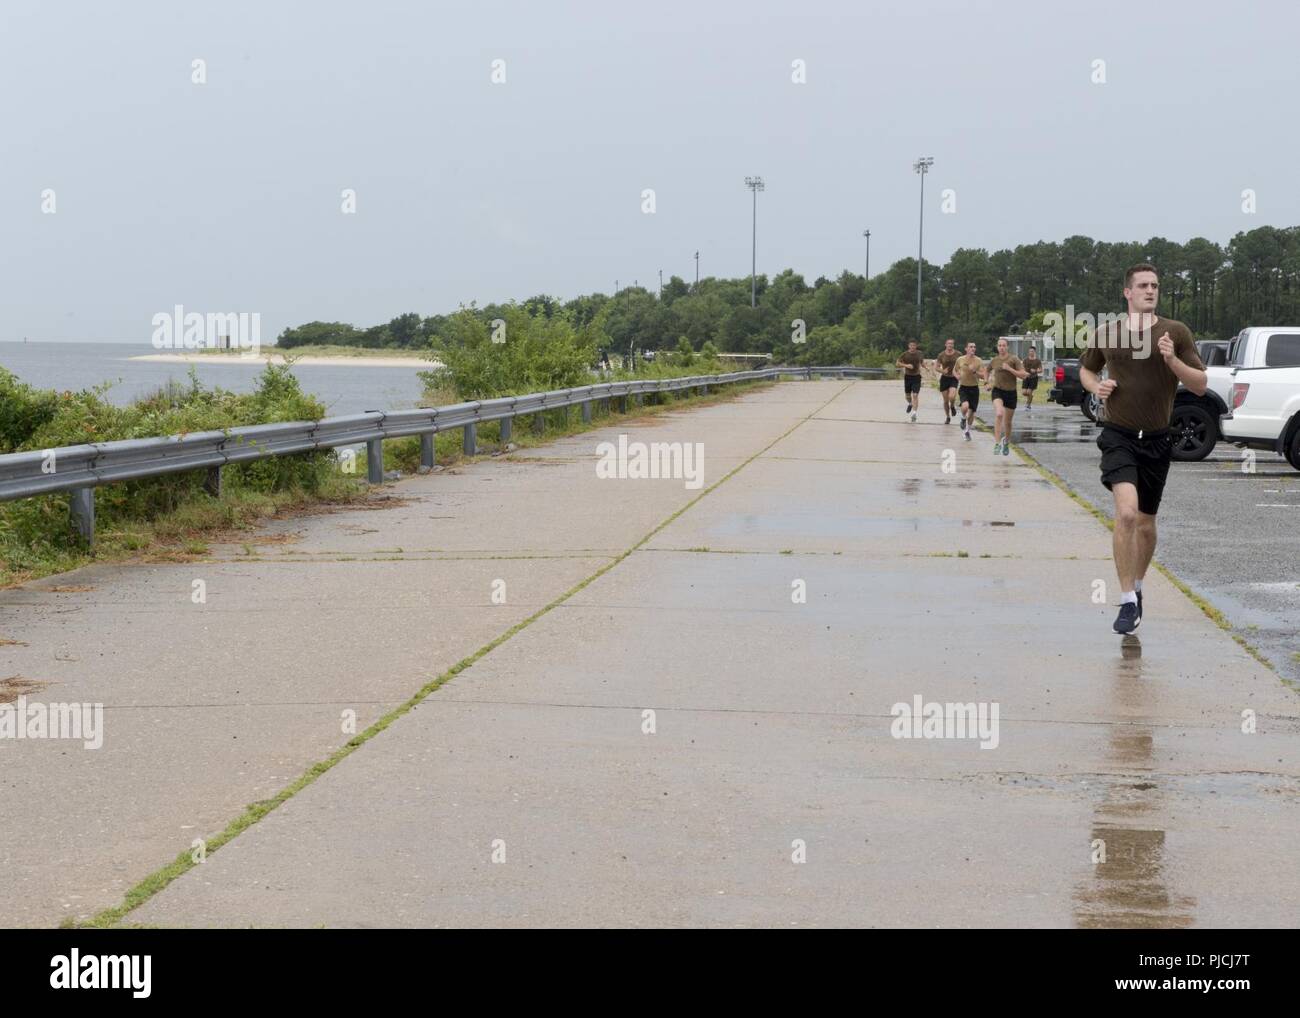 VIRGINIA BEACH, Va. (July 23, 2018) Midshipman 1st Class Ian Burgoyne, front, a U.S. Naval Academy midshipman, participates in the 1.5 mile run portion of a physical screening test (PST) as part of an explosive ordnance disposal summer cruise at Explosive Ordnance Disposal Group (EODGRU) 2 at Joint Expeditionary Base Little Creek-Fort Story. EODGRU 2 hosts the event to identify potential EOD officers from Naval Reserve Officers Training Corps and the U.S. Naval Academy prior to their senior year. Stock Photo